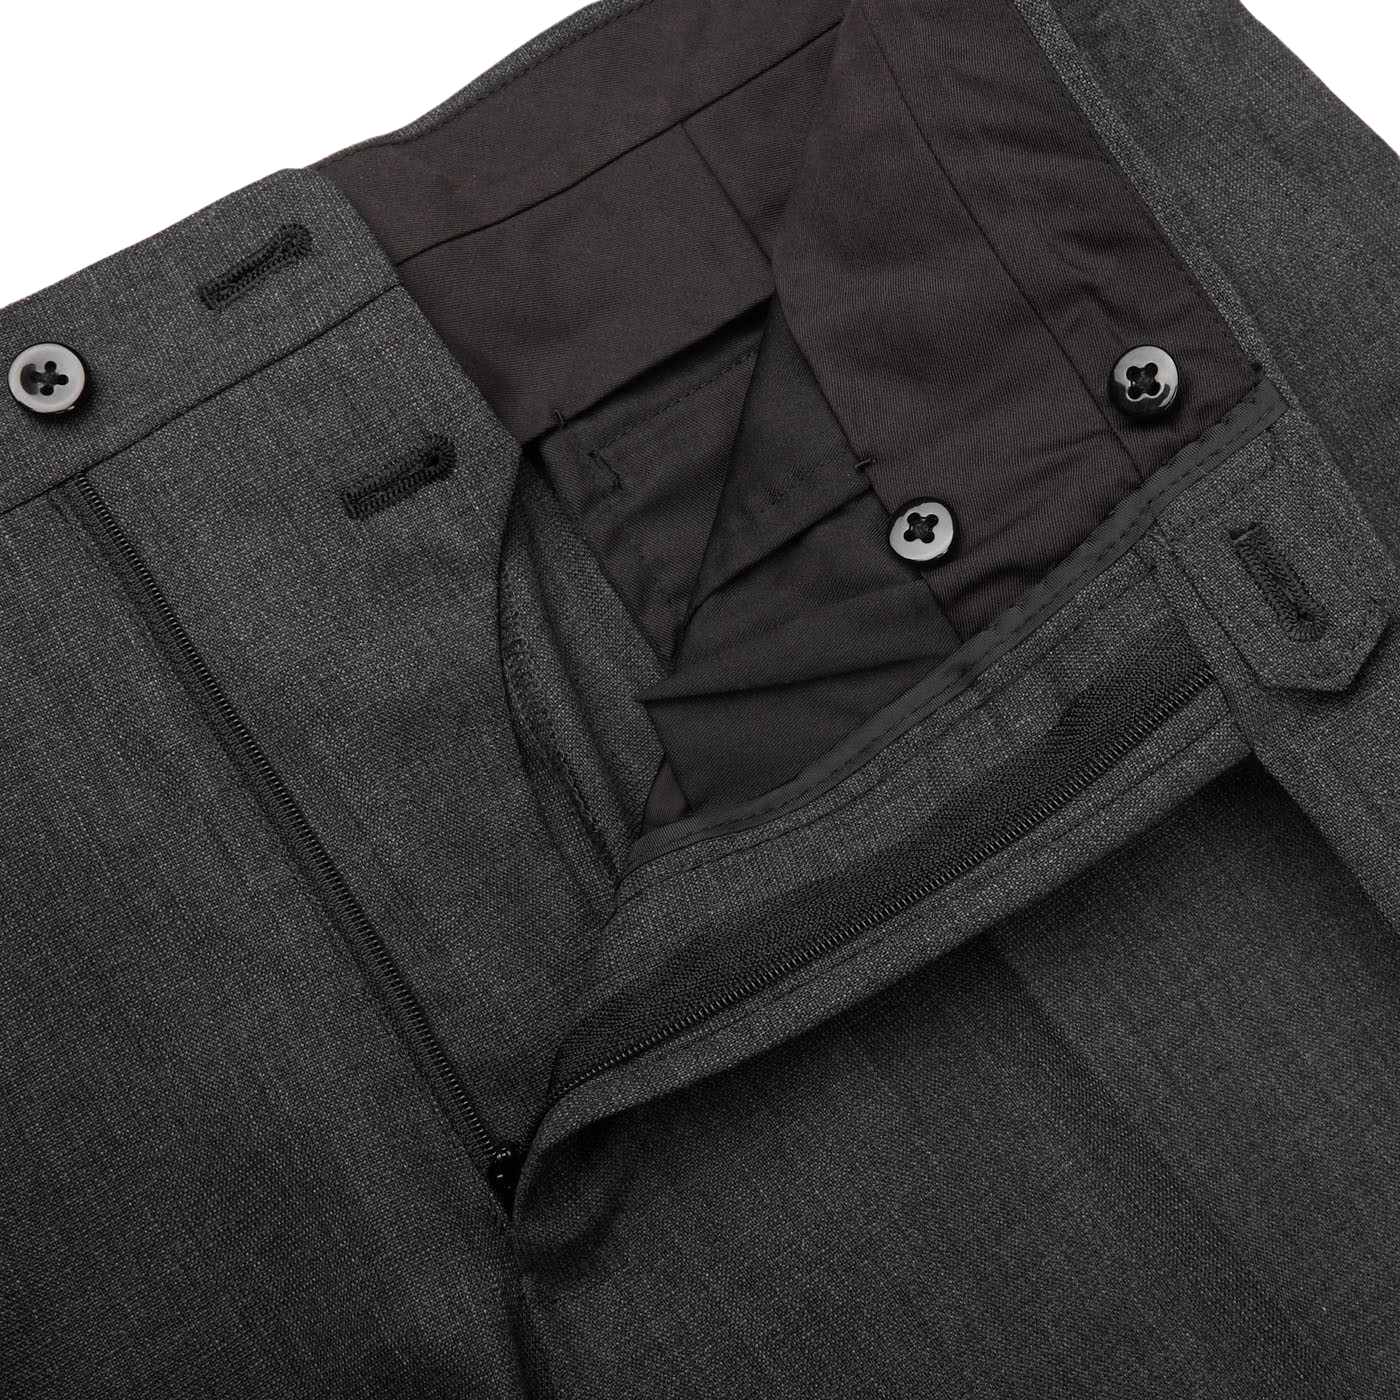 Close-up of a dark grey Ring Jacket High Twist Wool Suit men's trousers with buttons, zipper, and inner lining details.